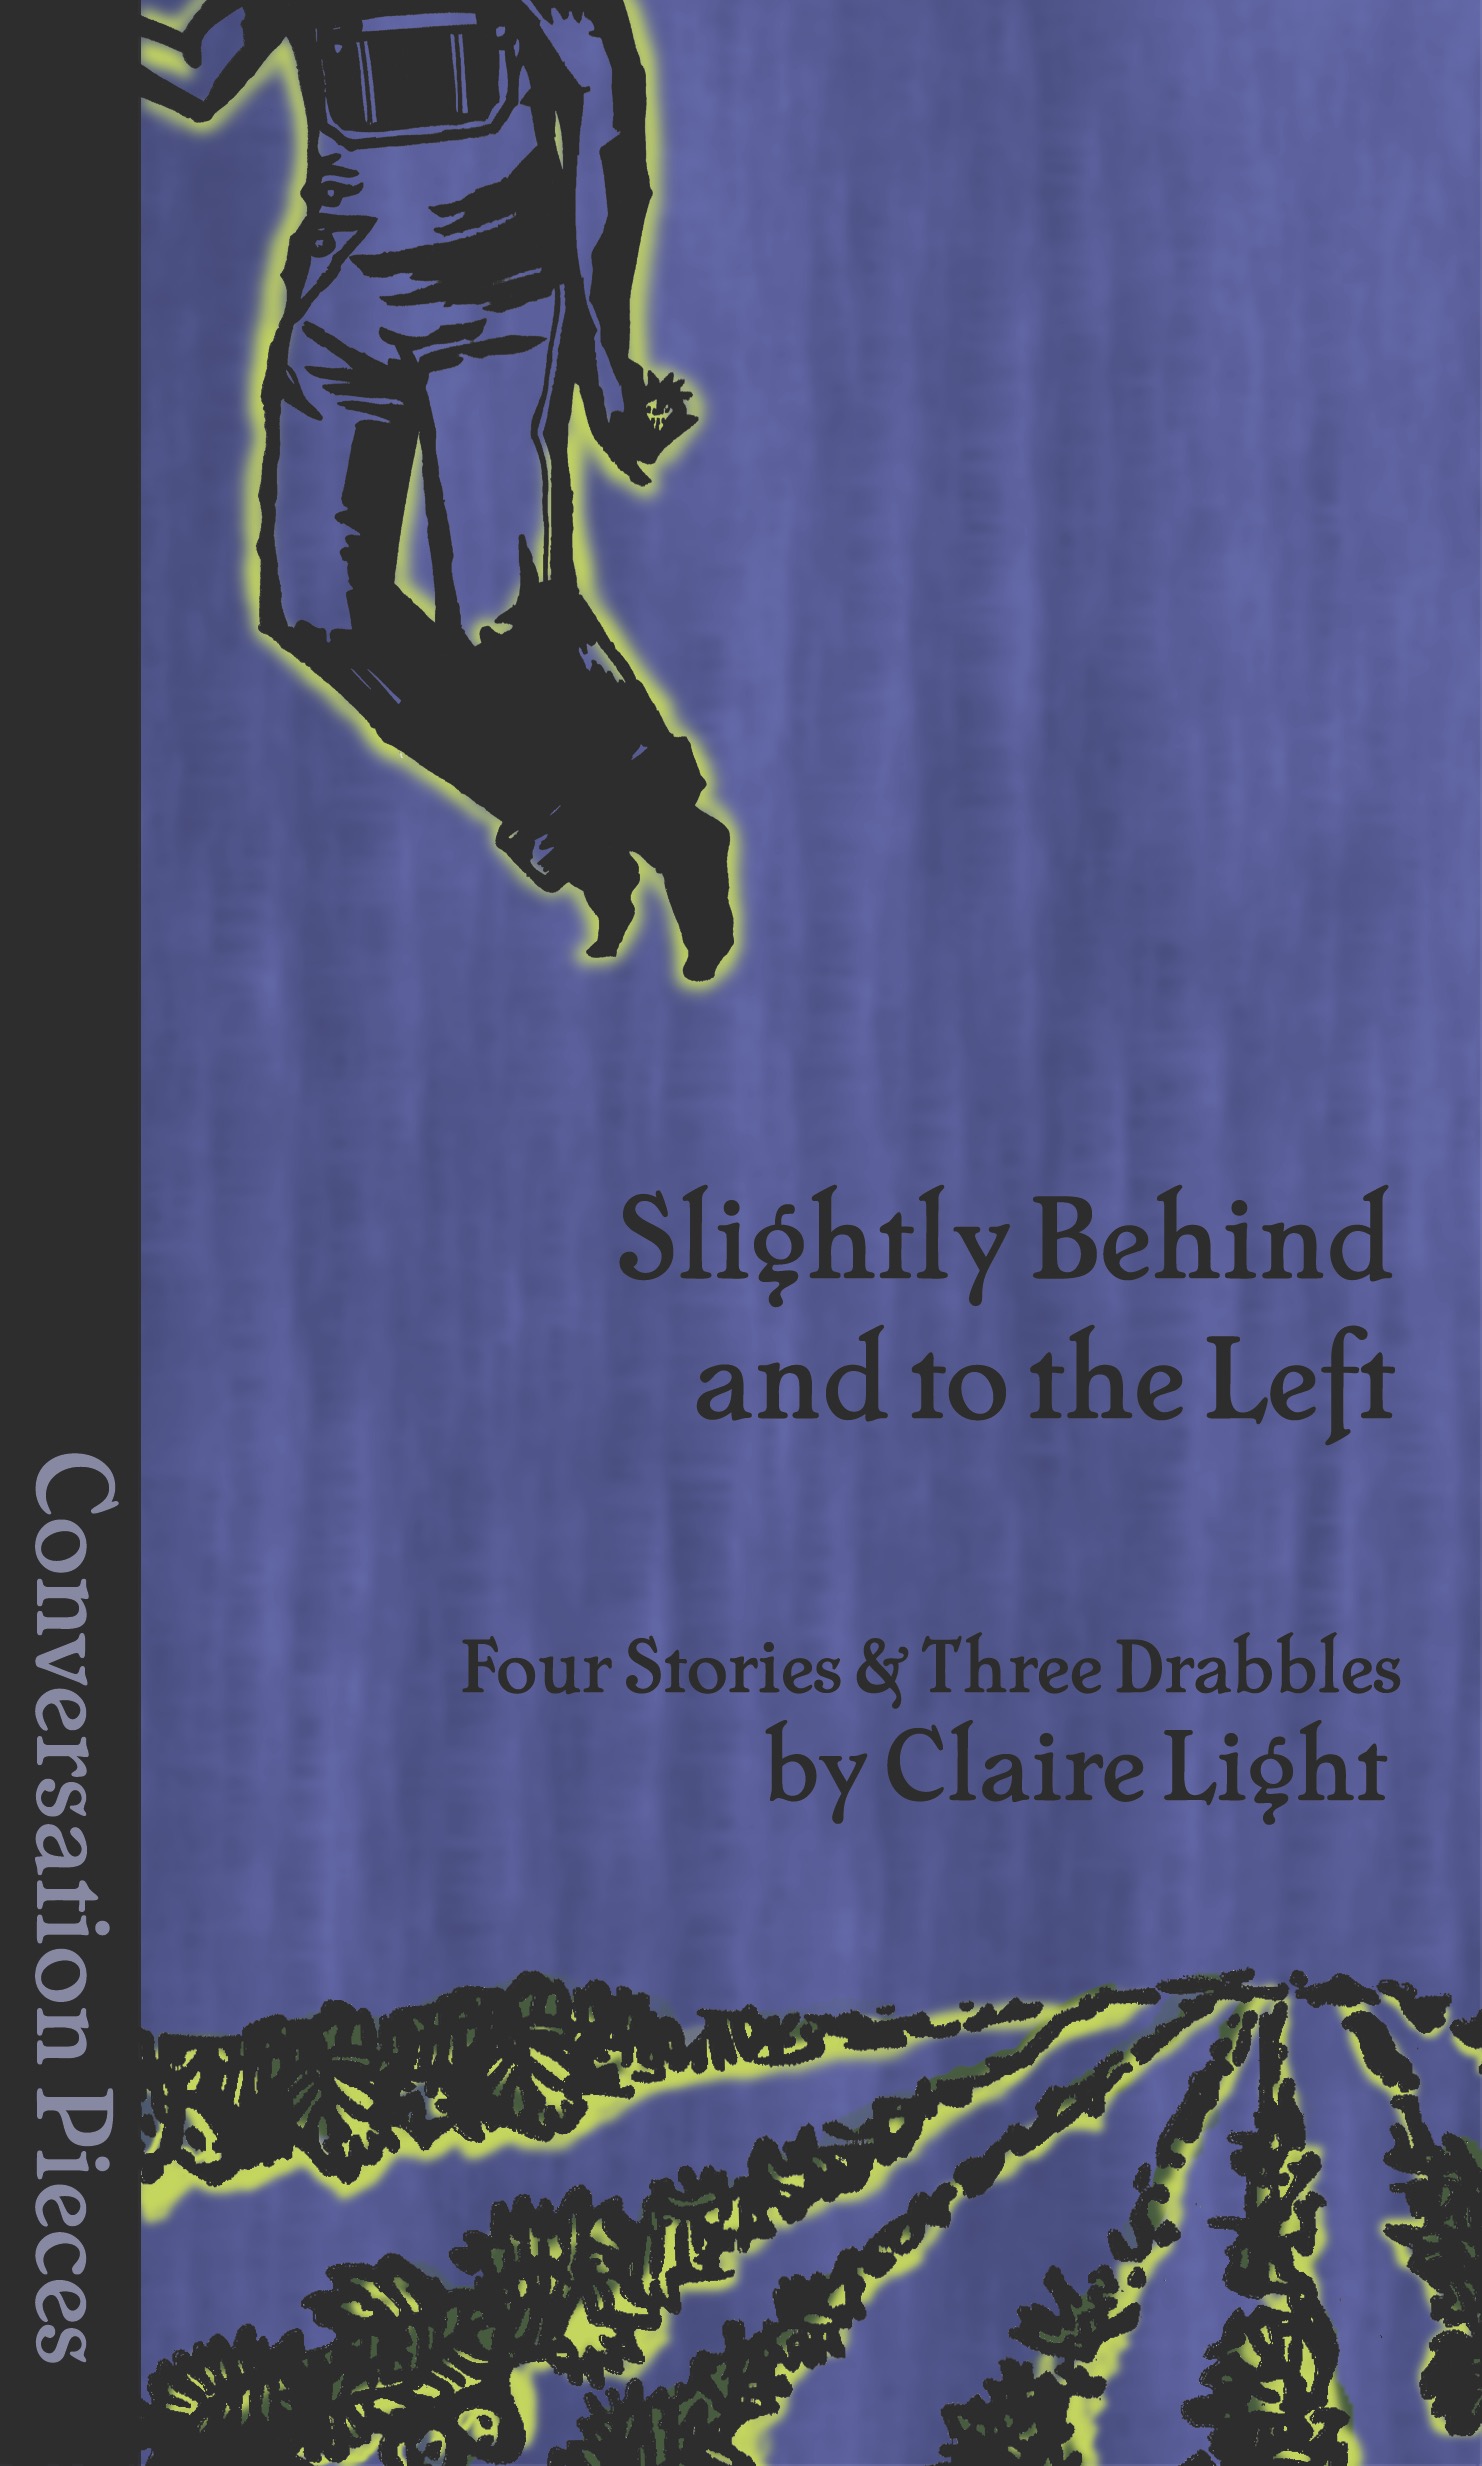 book cover for slightly behind and to the left